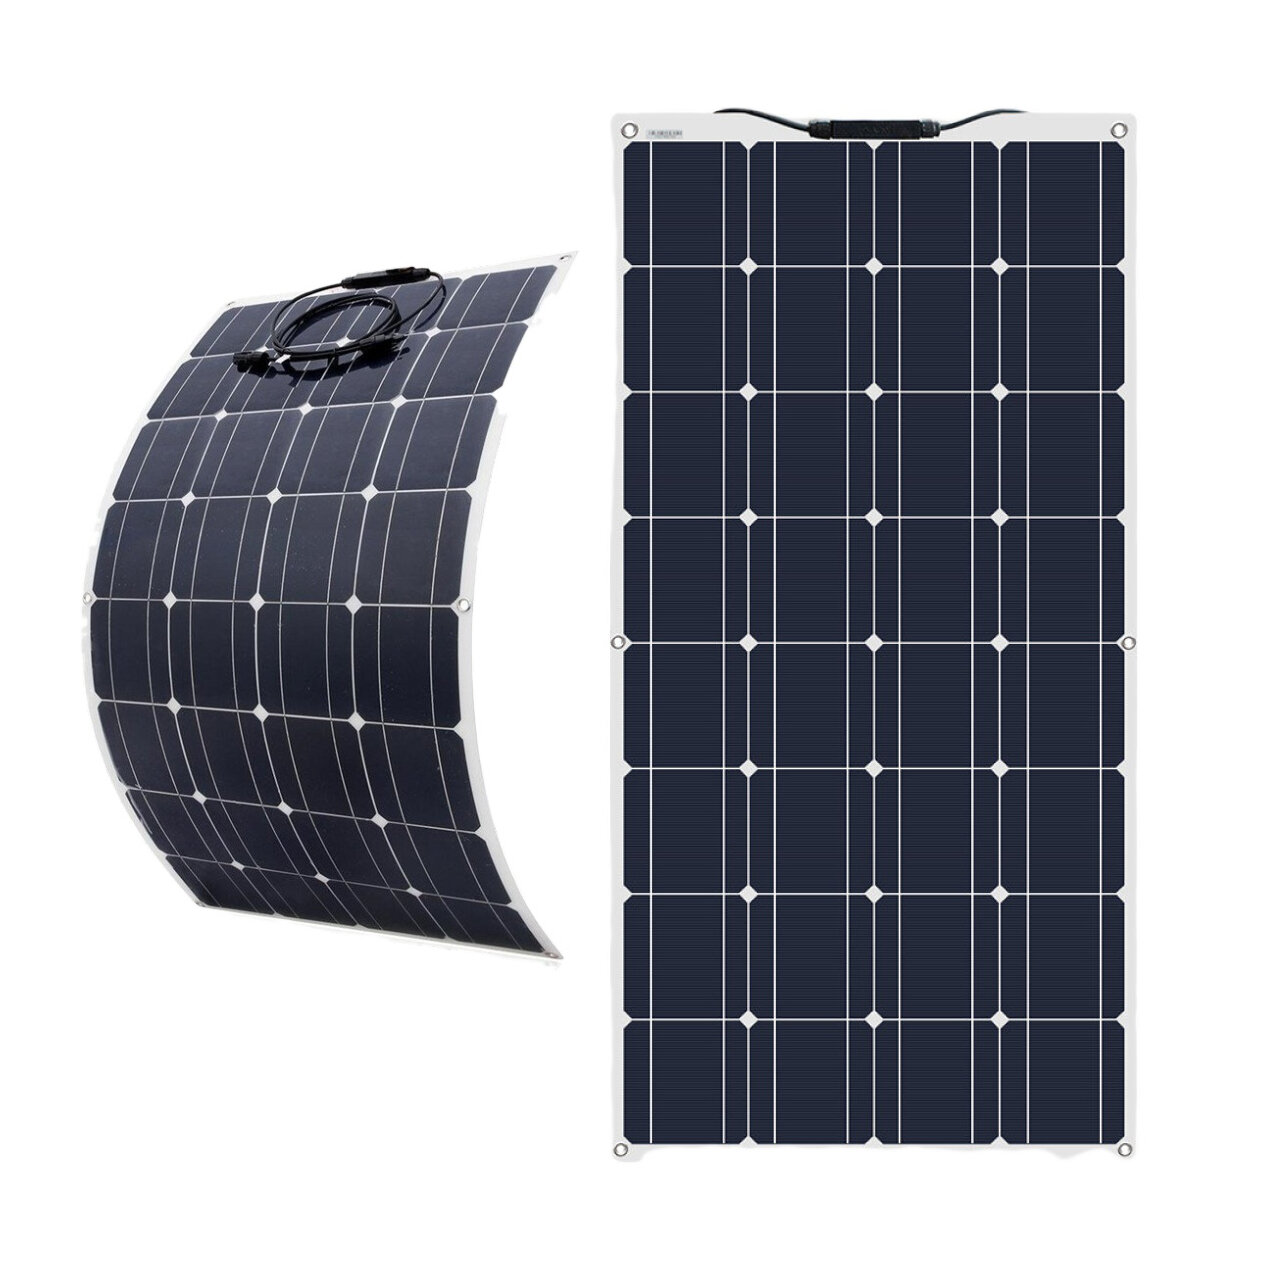 120W Solar Panel Flexible Portable Battery Charger Monocrystalline Solar Cell Outdoor Camping Travel